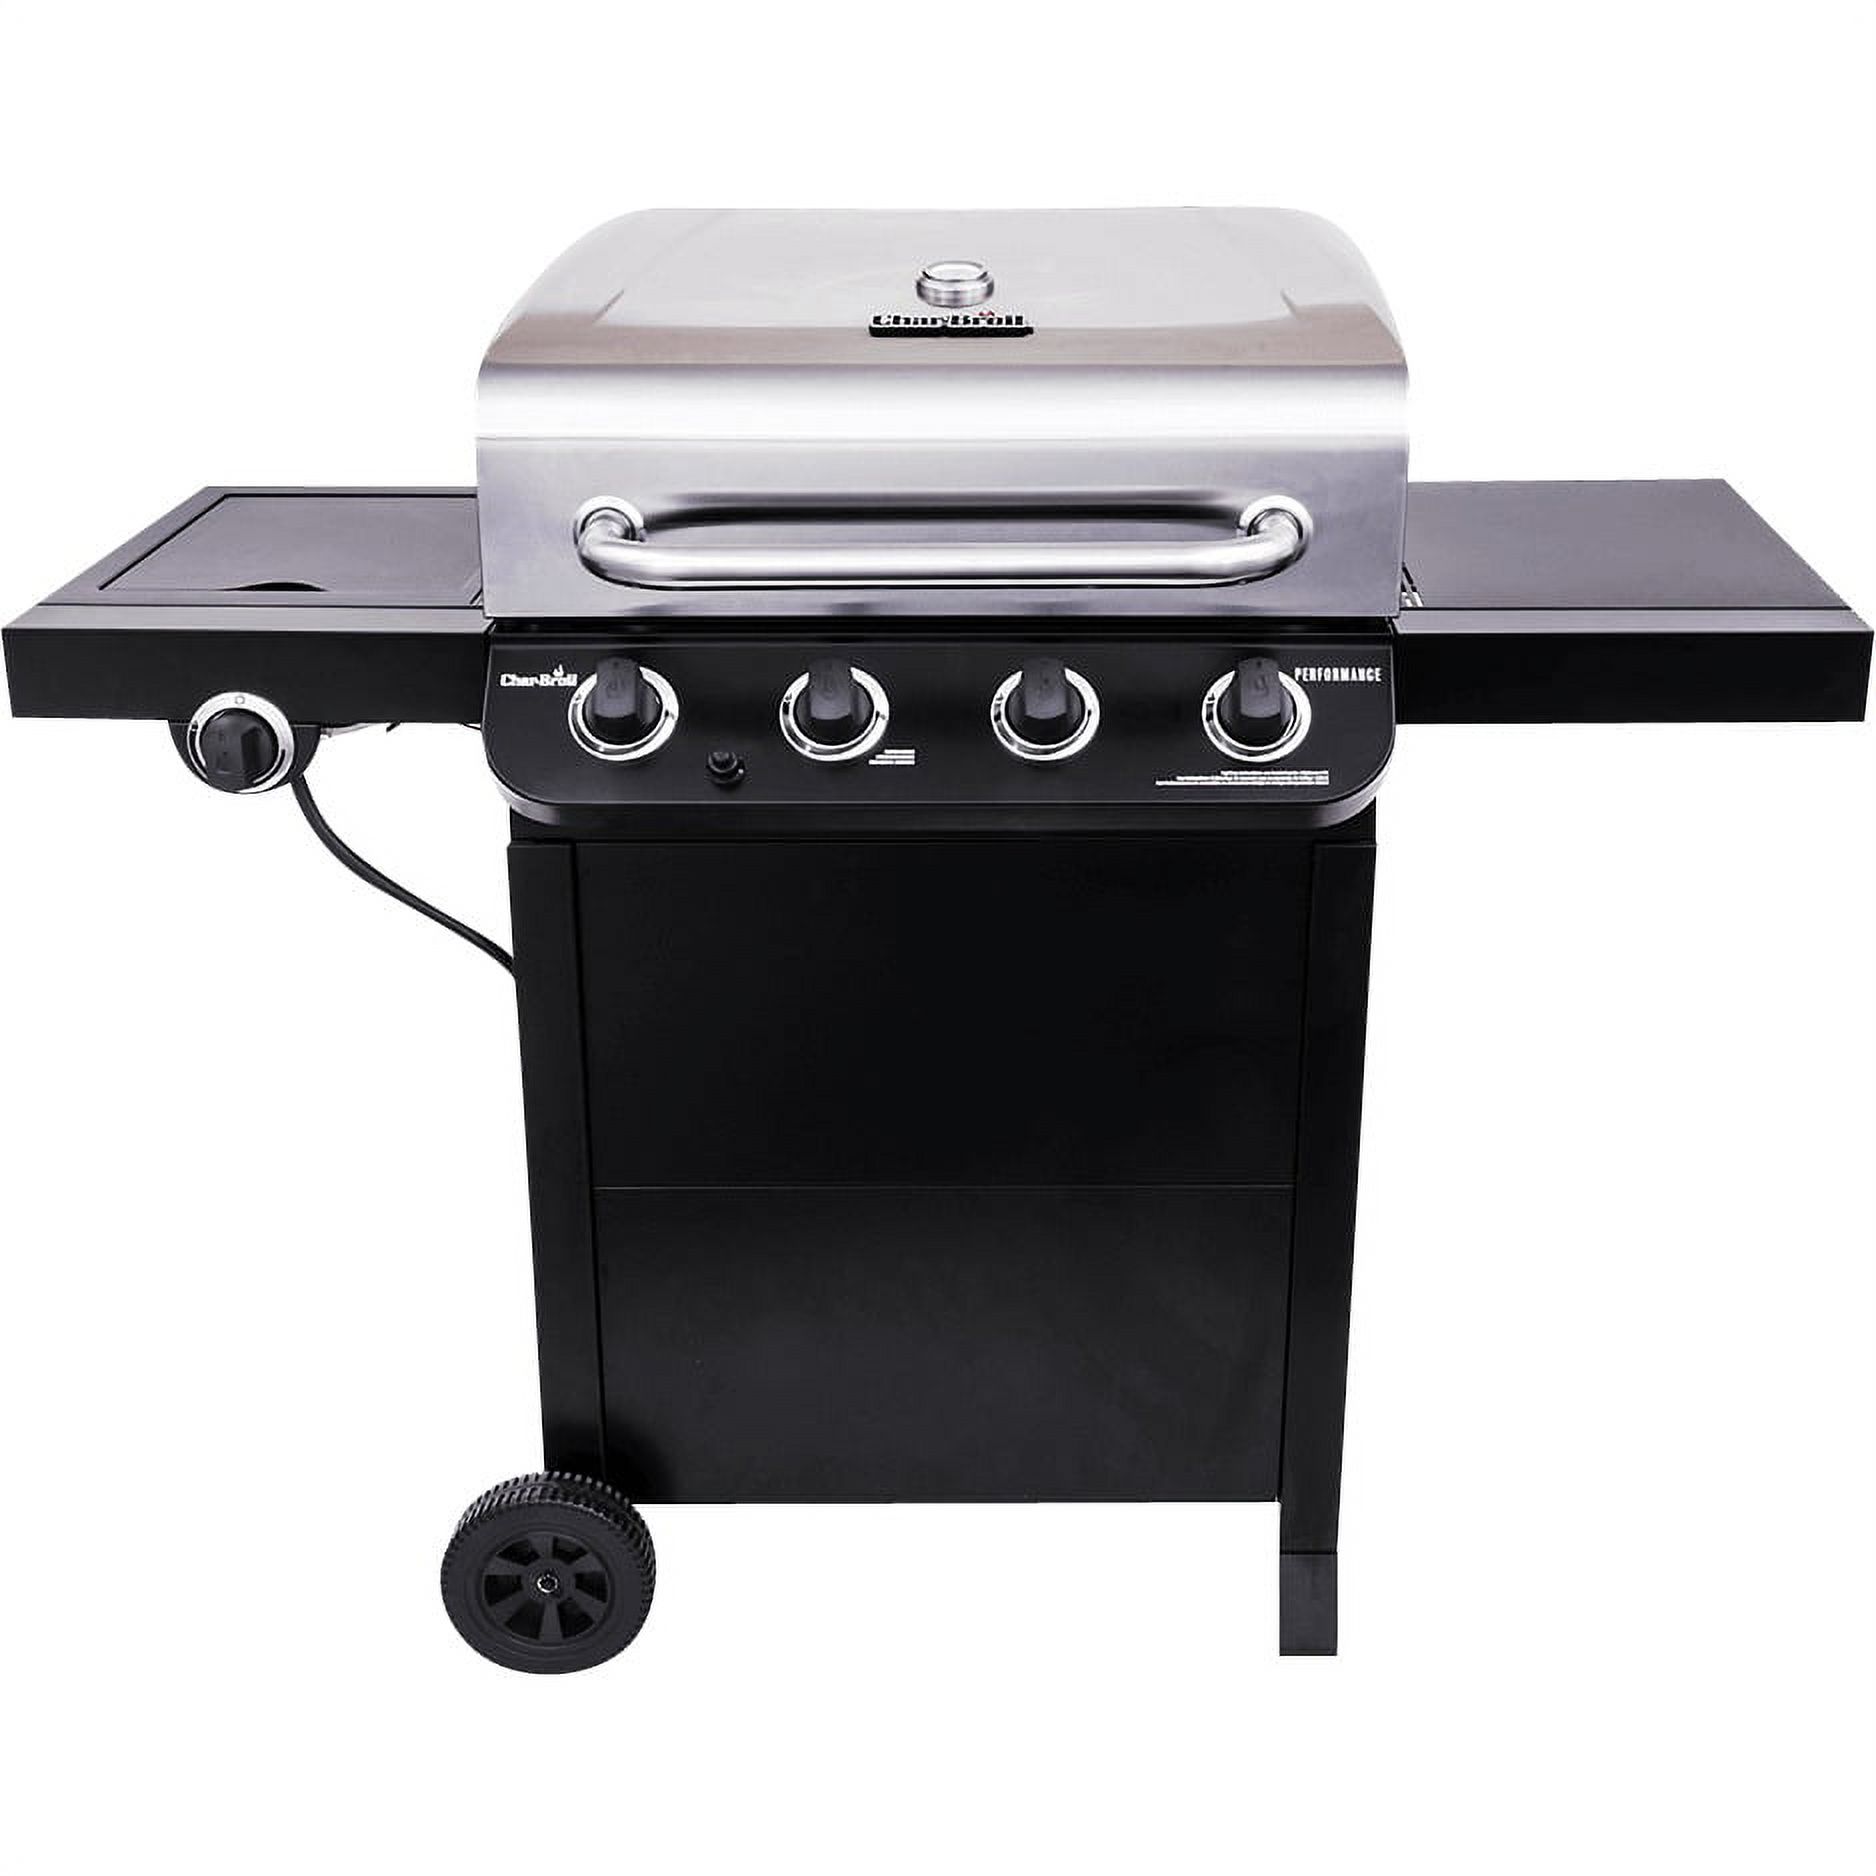 Char-Broil 463347418 Performance 4-Burner Gas Grill - image 1 of 5